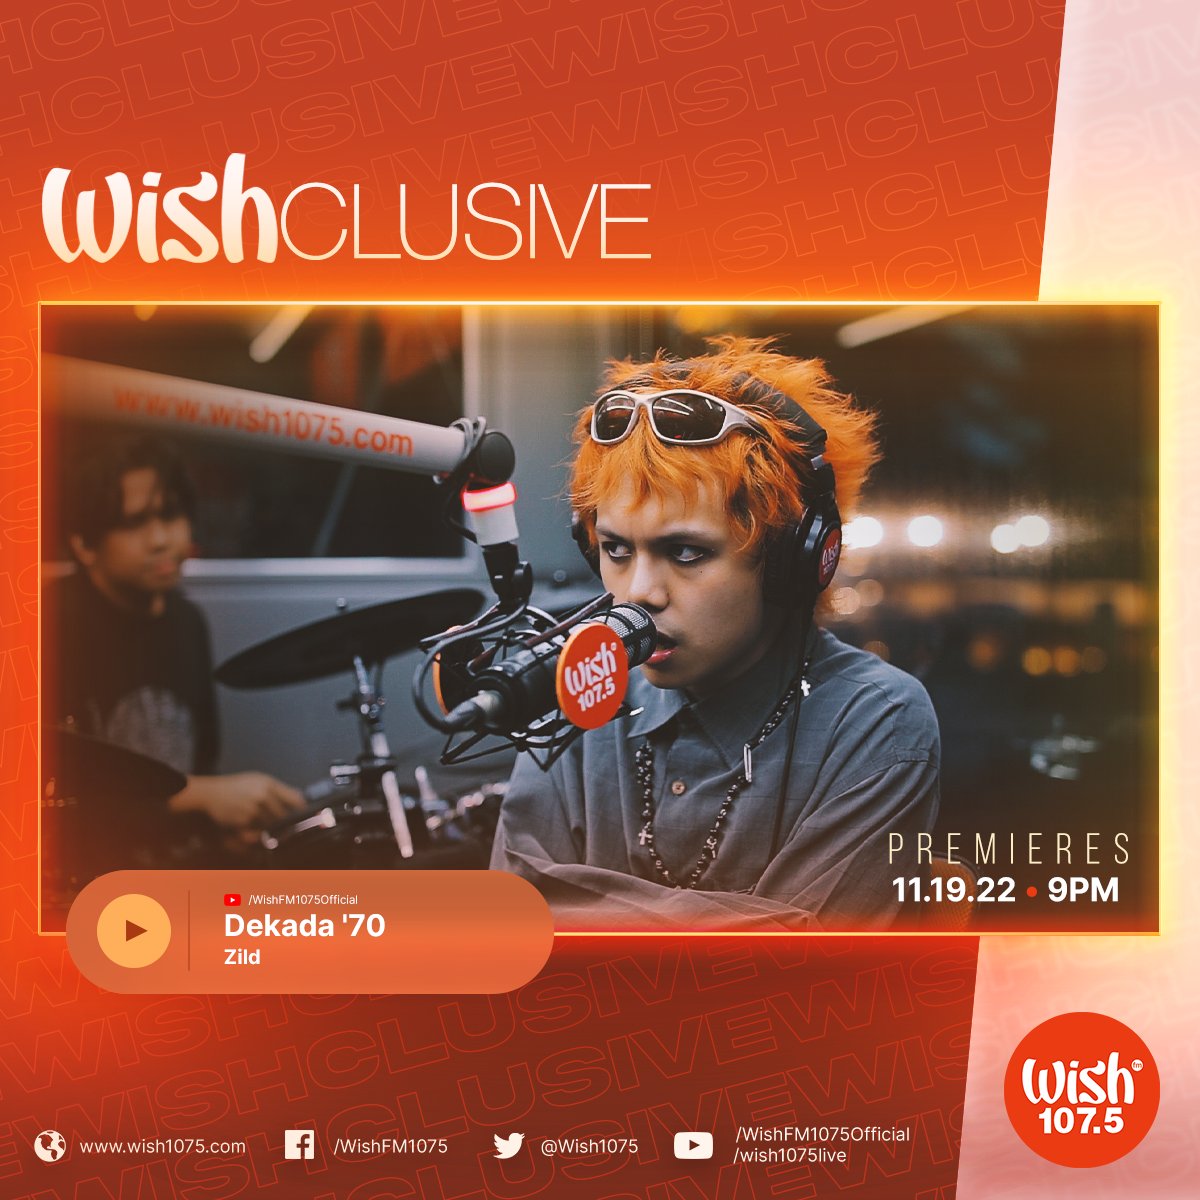 Zild is performing a track off his newly released 'Medisina' album for his newest Wishclusive! Don't miss the premiere of 'Dekada '70' at 9 p.m. PHT on our YouTube channel!